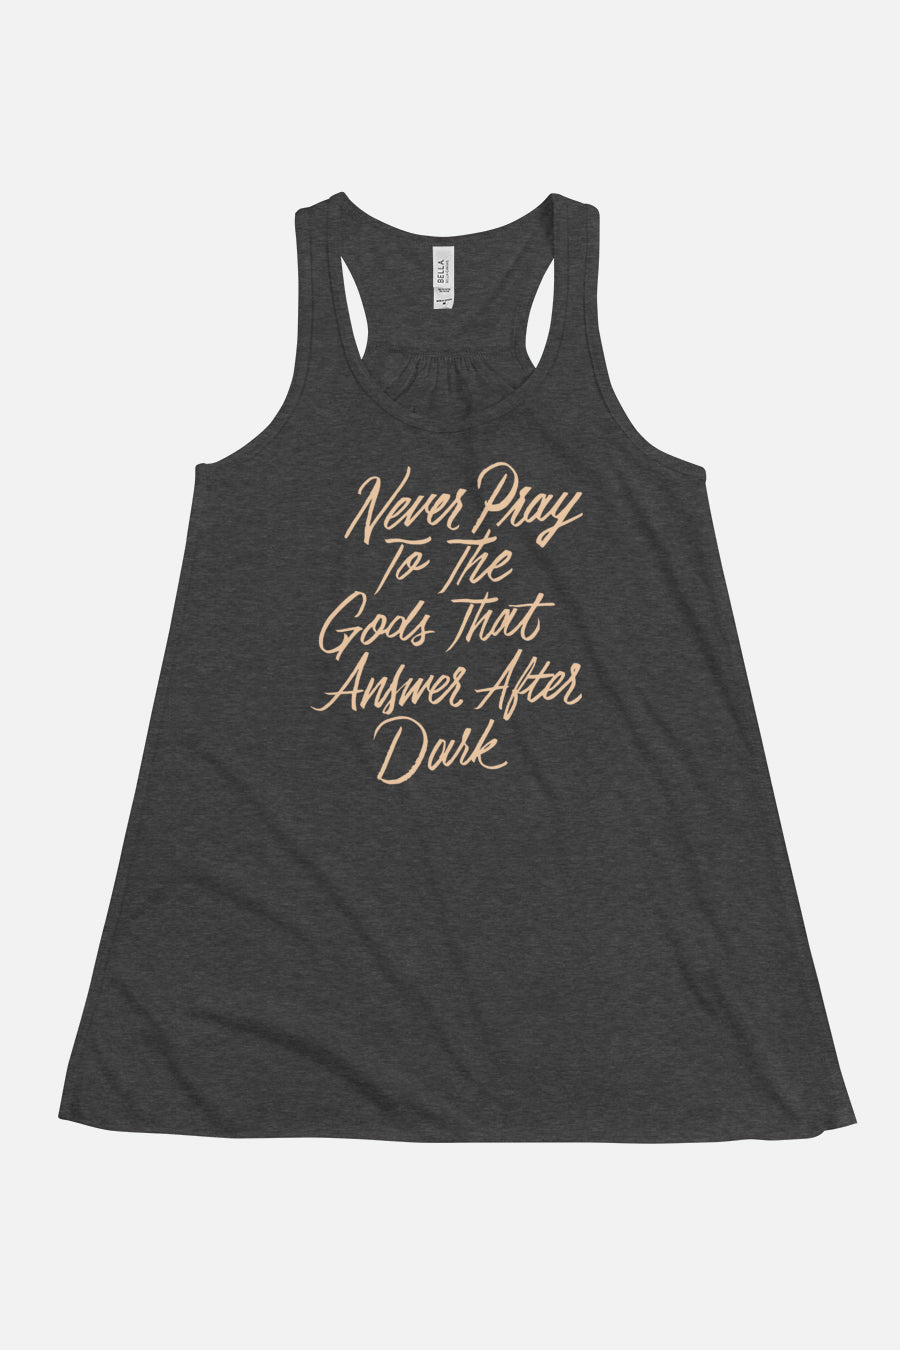 Never Pray to the Gods that Answer After Dark Racerback Tank | The Invisible Life of Addie LaRue